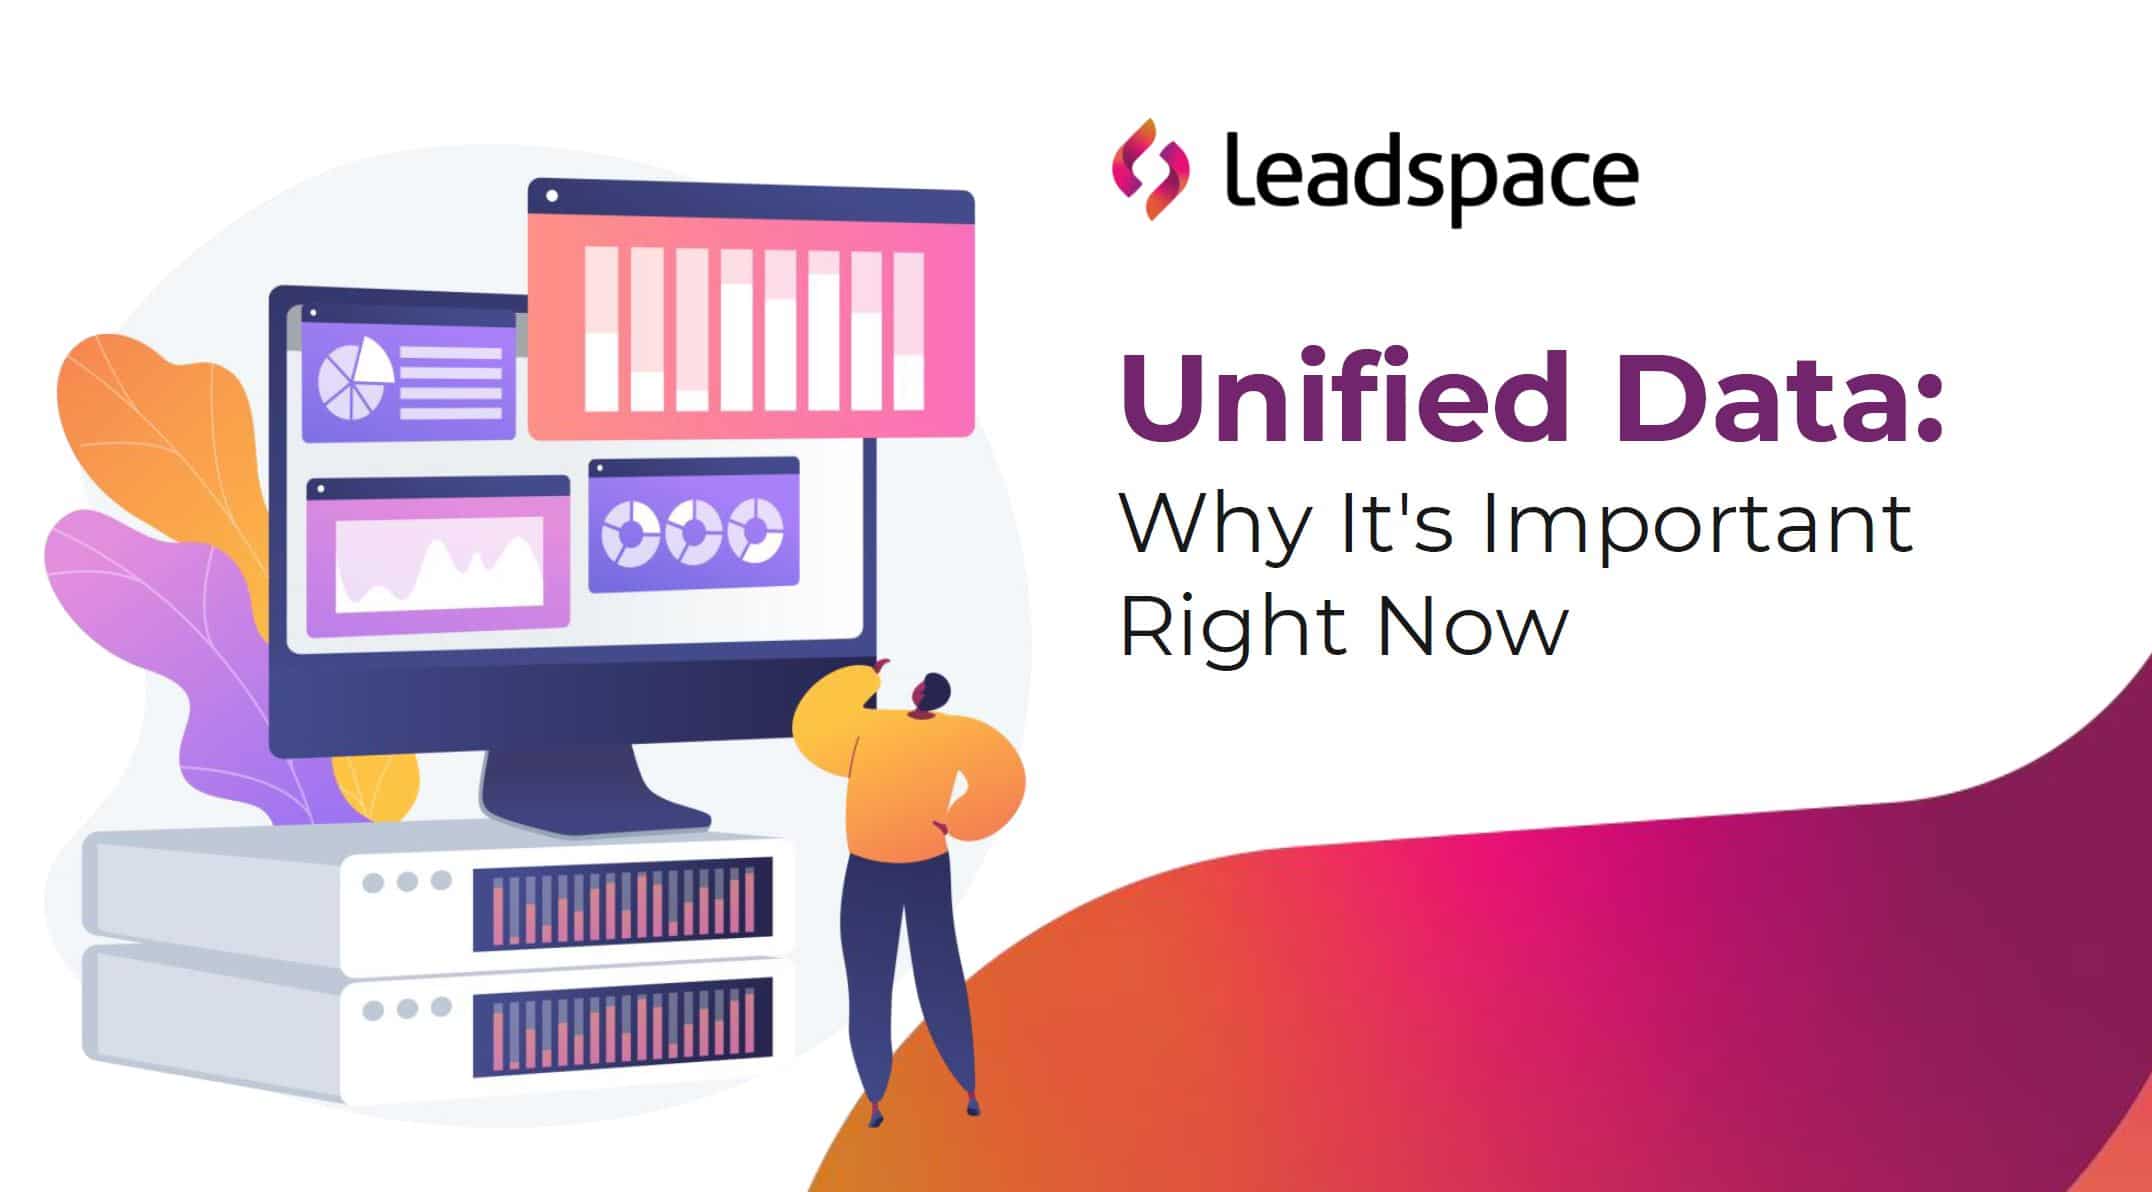 Intro slide - Unified data, why it's important right now